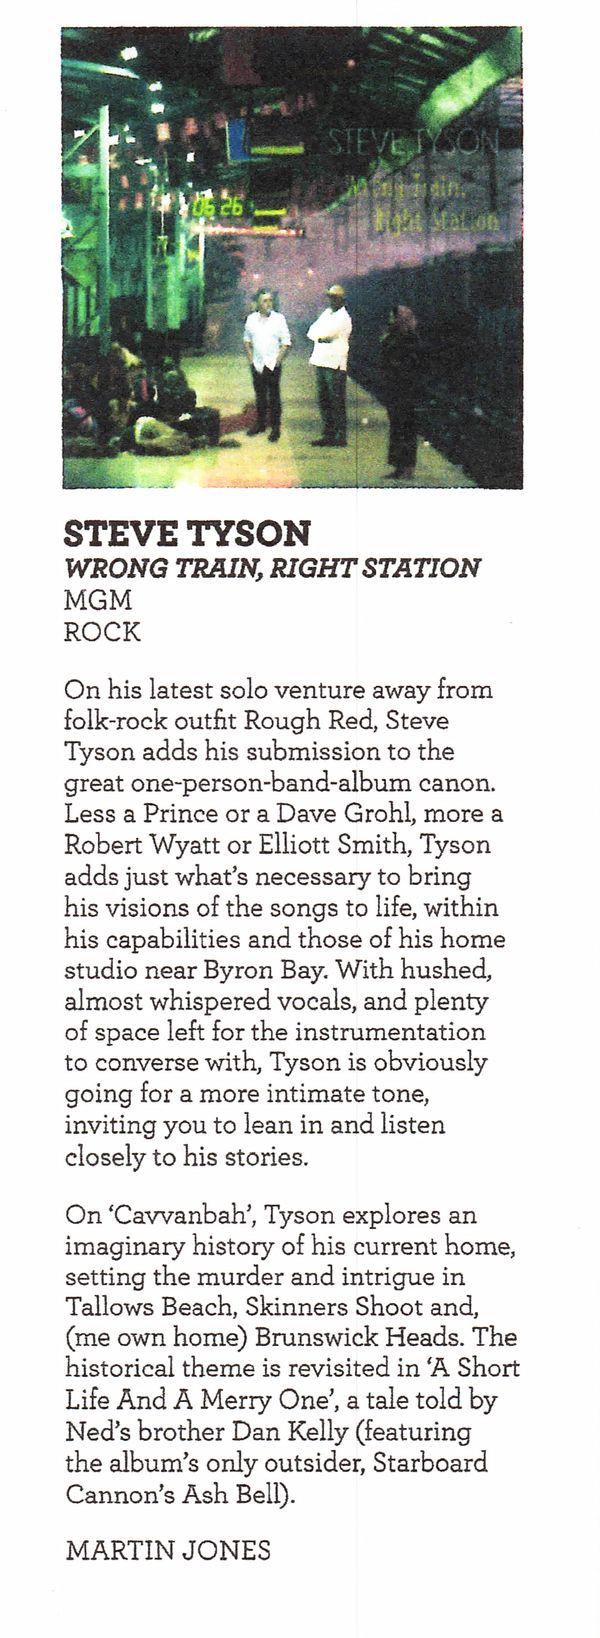 Review of WRONG TRAIN RIGHT STATION by Marty Jones, Rhythms Magazine, September 2017 issue